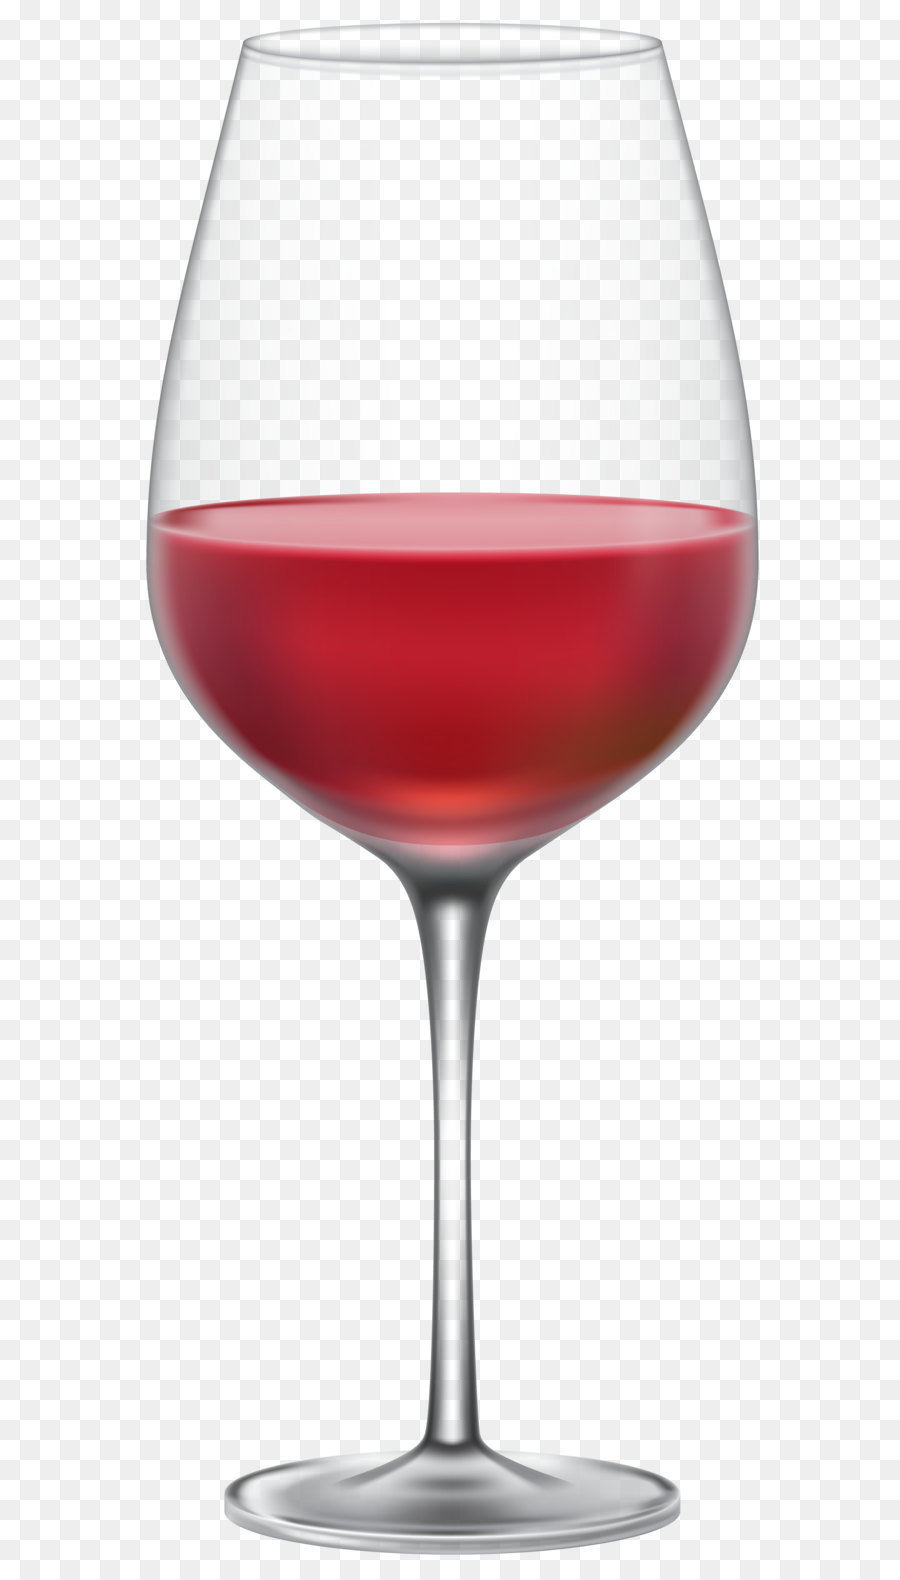 Red Wine White wine Wine glass - Glass of White Wine Transparent Clip Art Image png download - 3322*8000 - Free Transparent White Wine png Download.